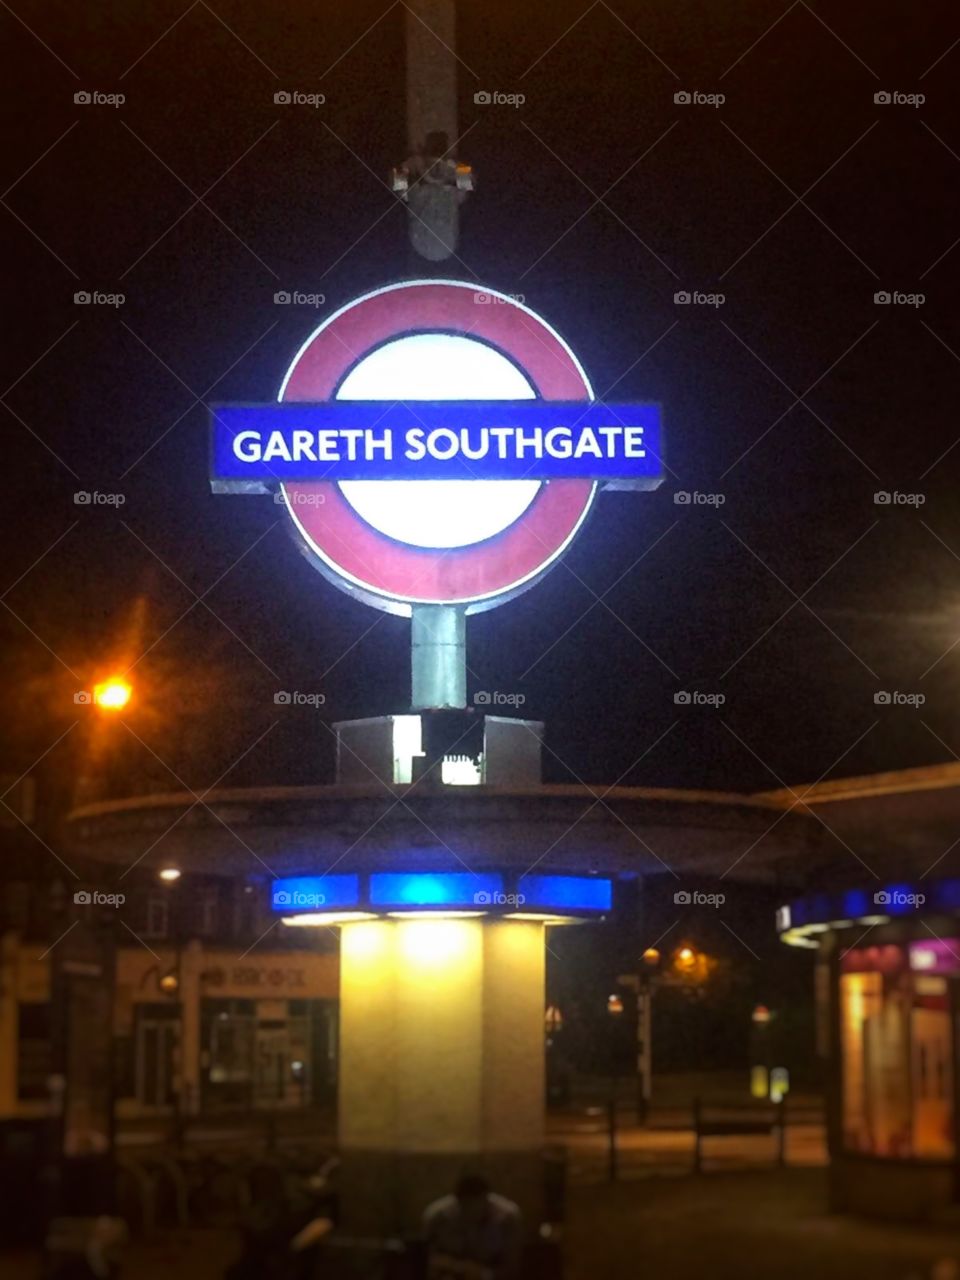 Southgate station north London during World Cup fever.